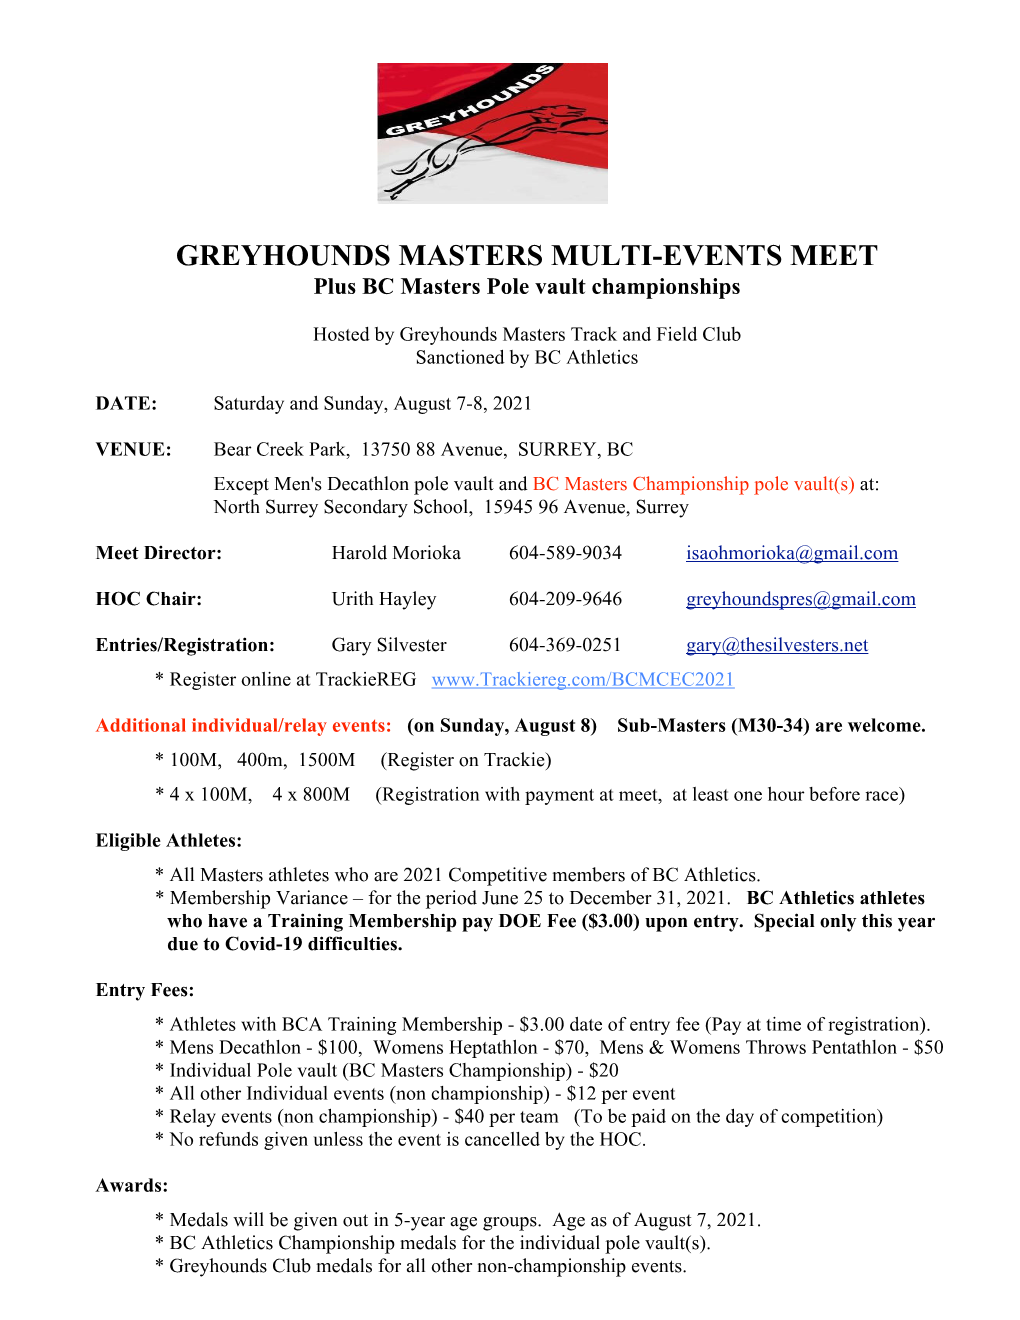 GREYHOUNDS MASTERS MULTI-EVENTS MEET Plus BC Masters Pole Vault Championships